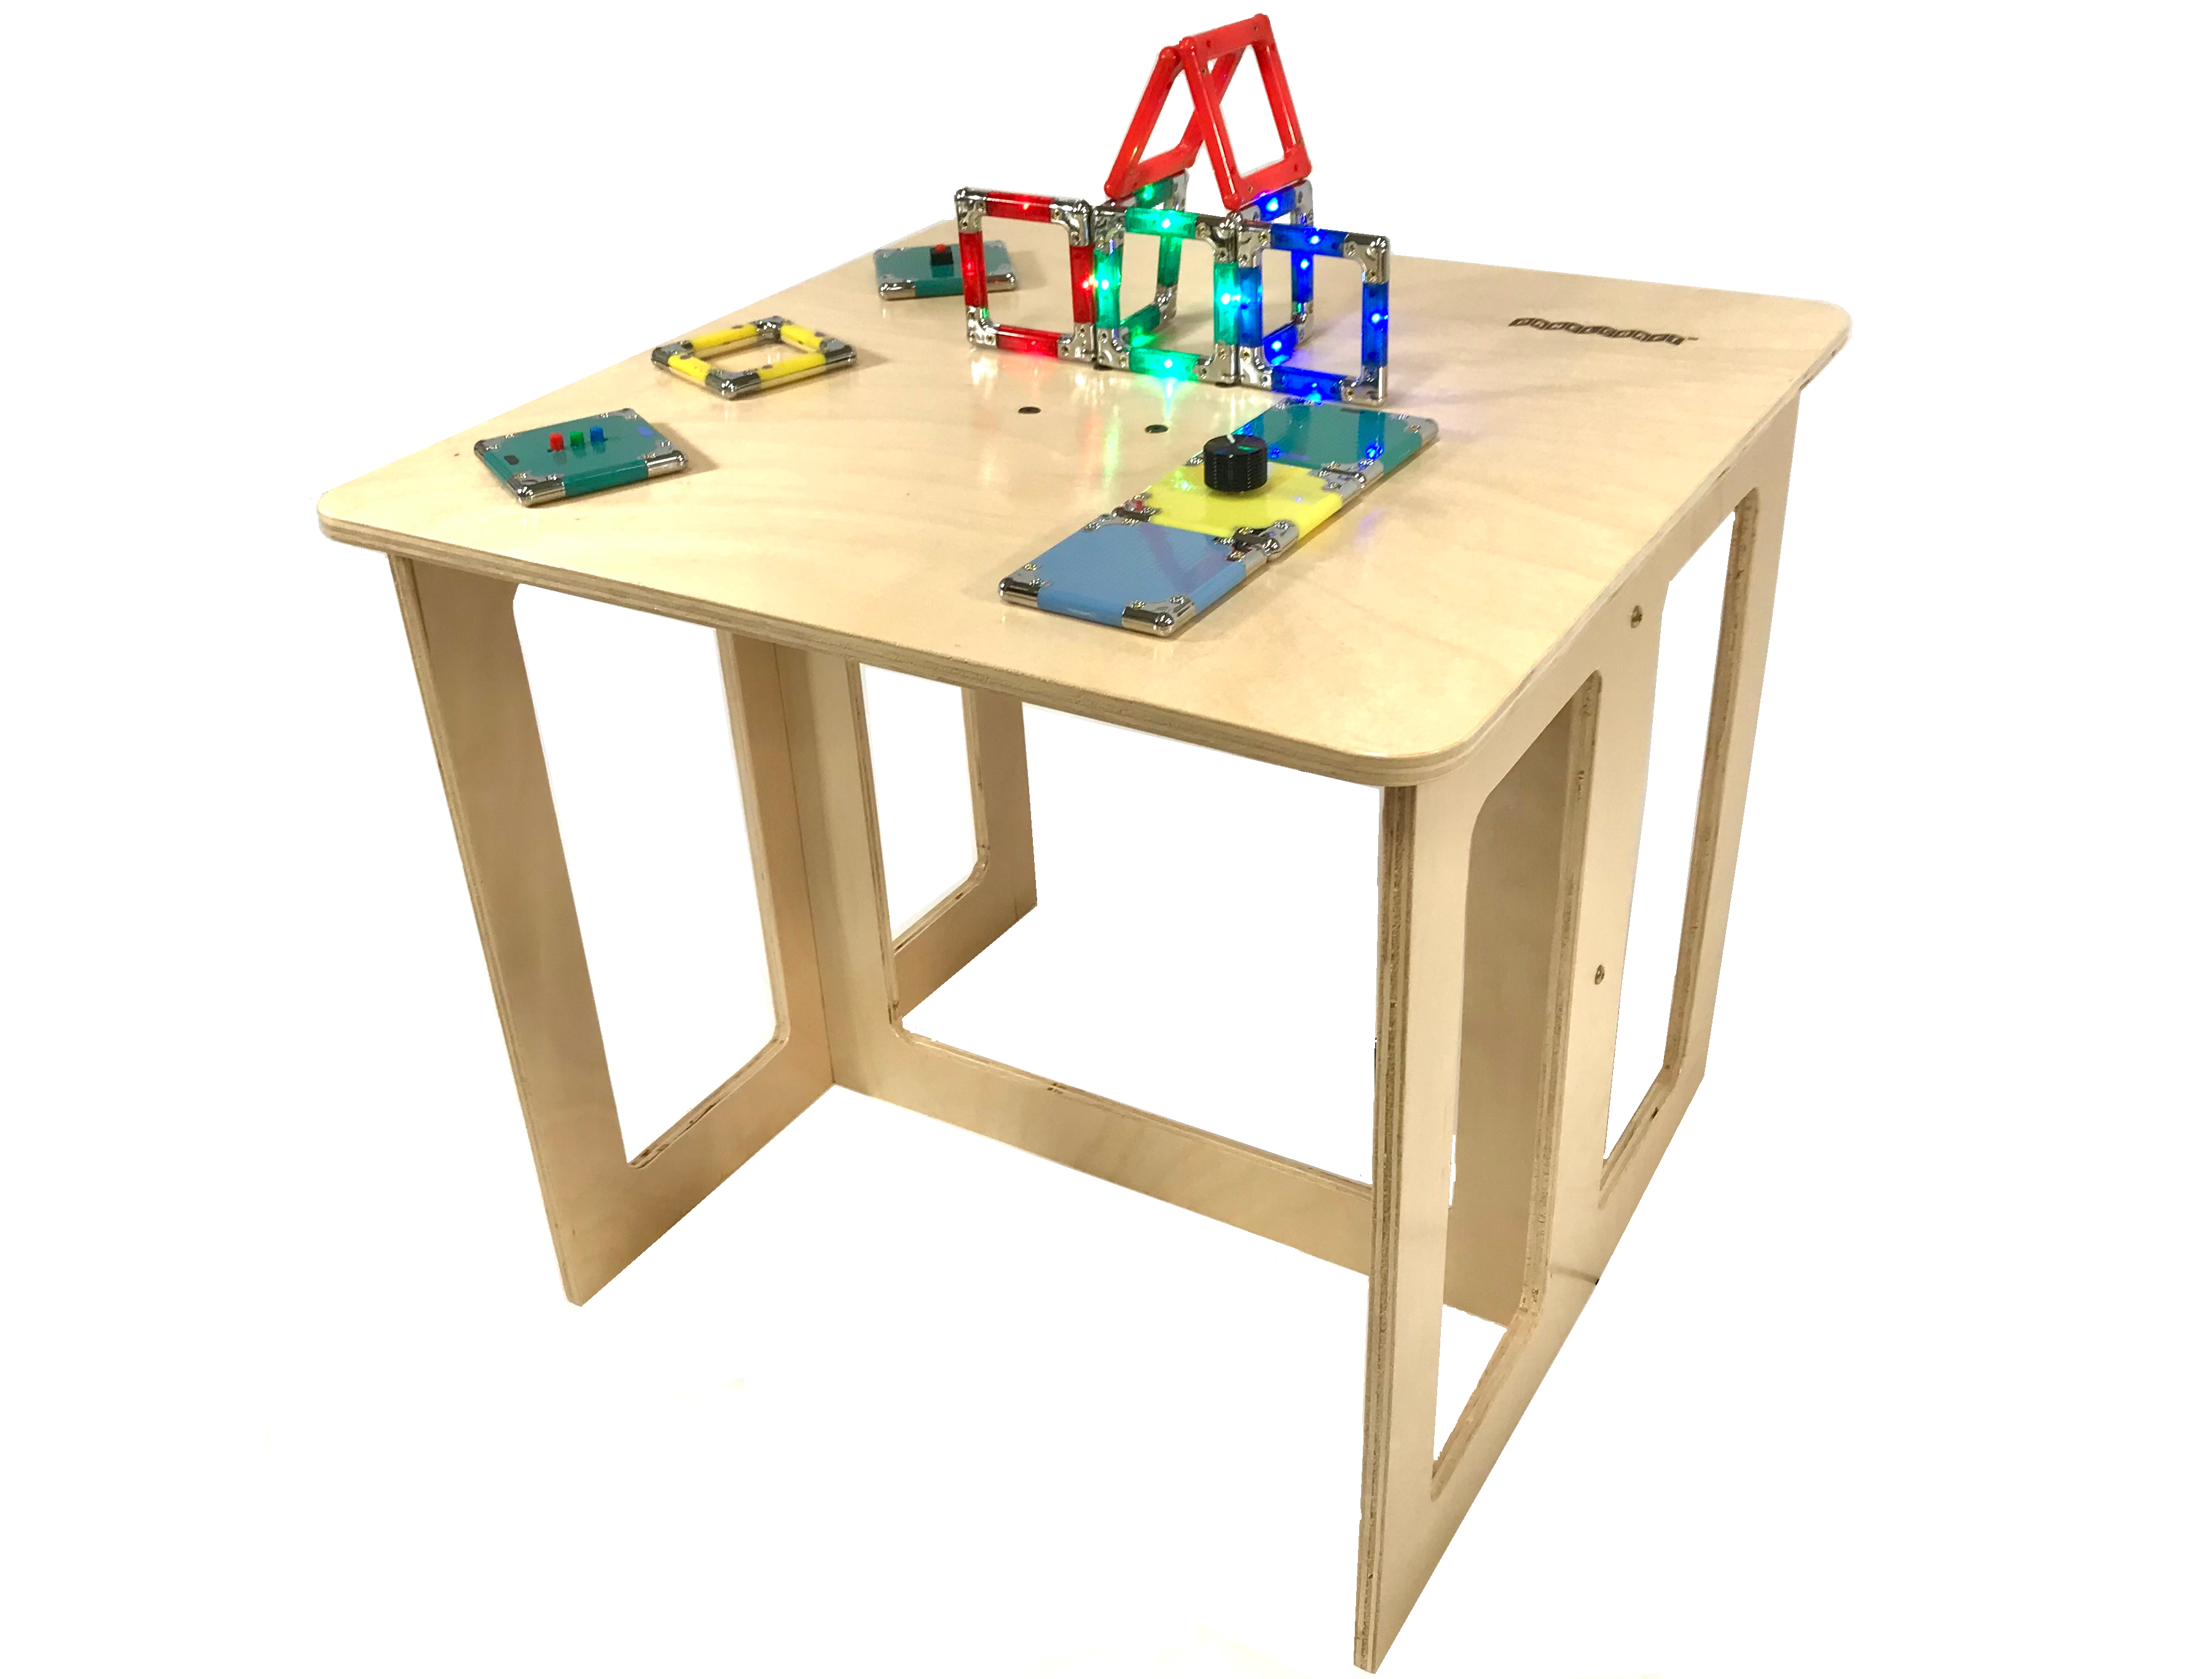 Magcircuits Play/Exhibit Table